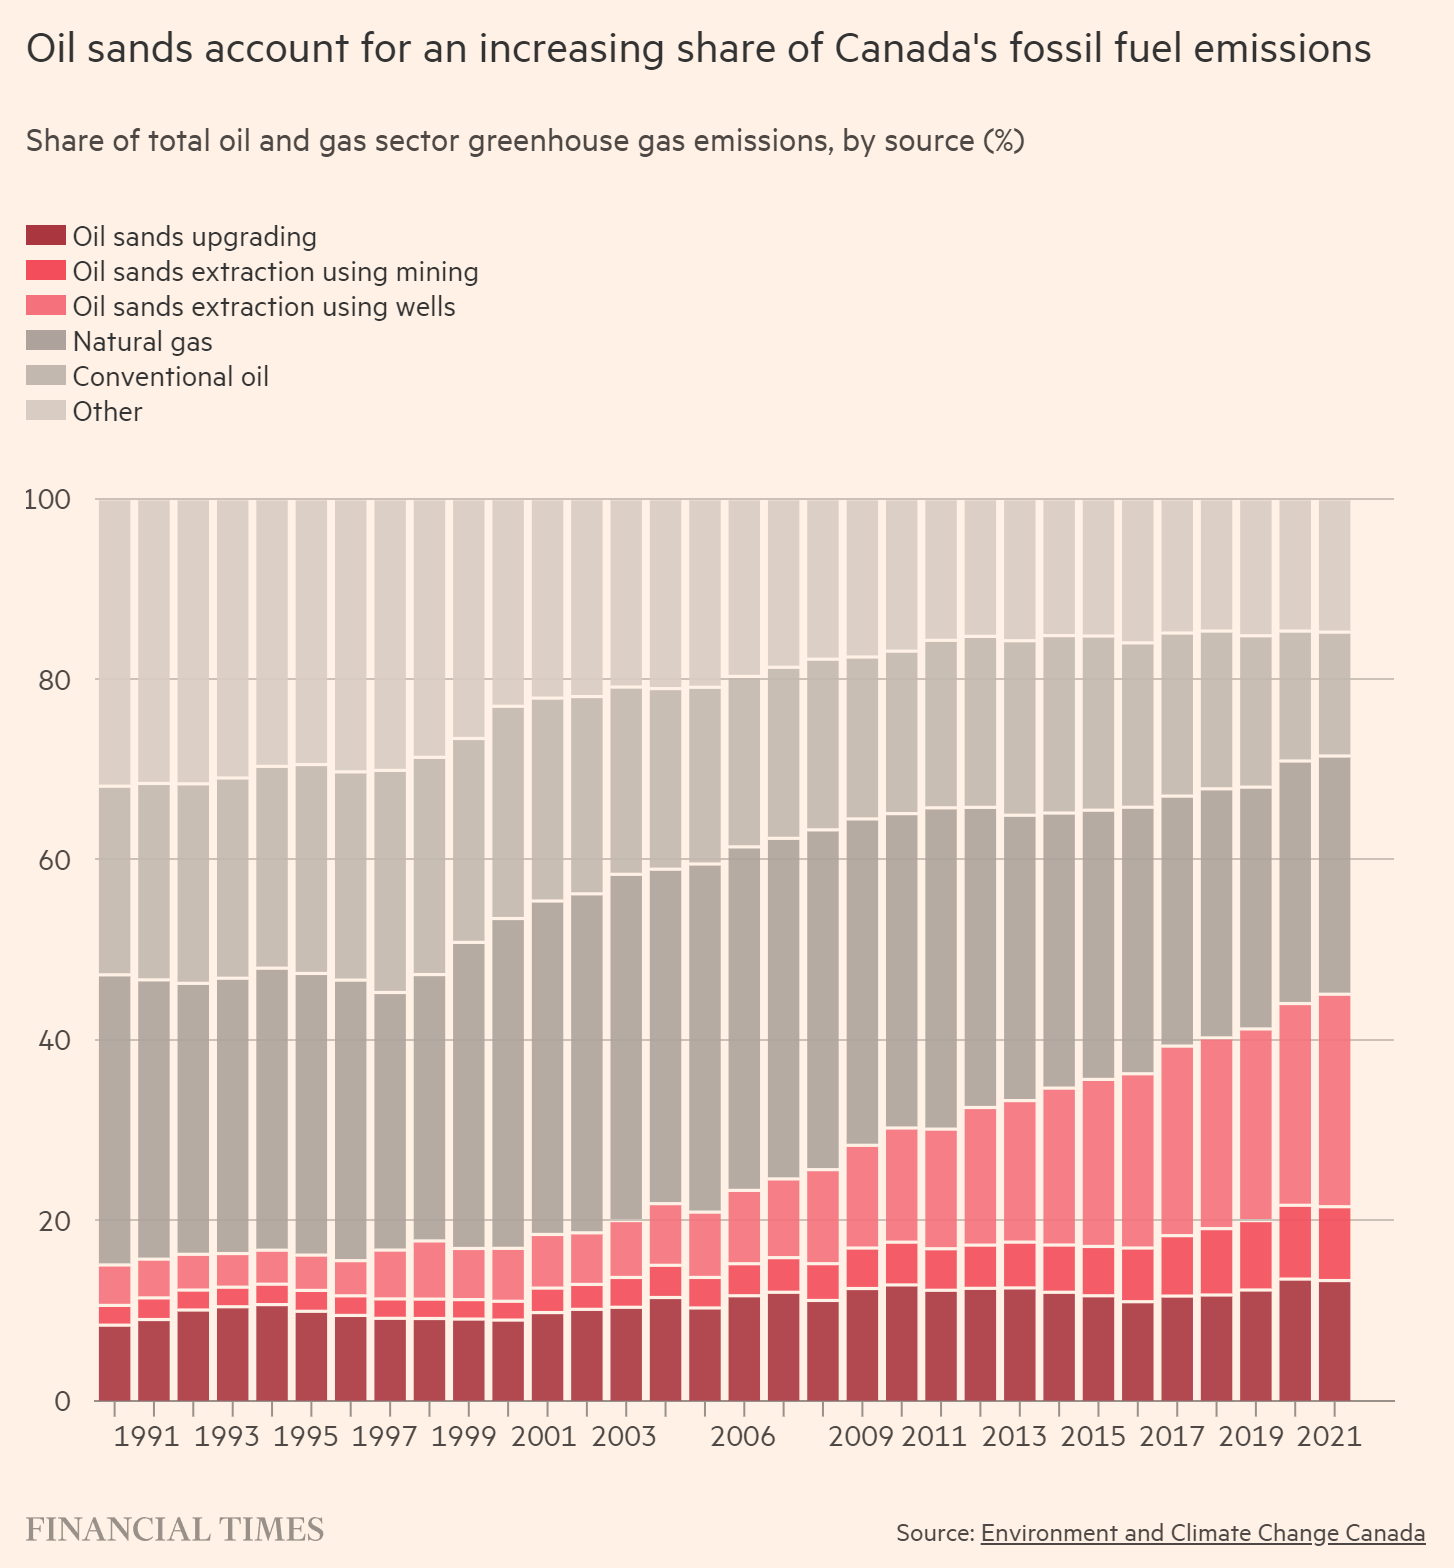 Share of Canada’s total oil and gas sector greenhouse gas emissions, by source (percent), 1990-2021. Oil sands account for an increasing share of Canada’s fossil fuel emissions. Data: Environment and Climate Change Canada. Graphic: Financial Times